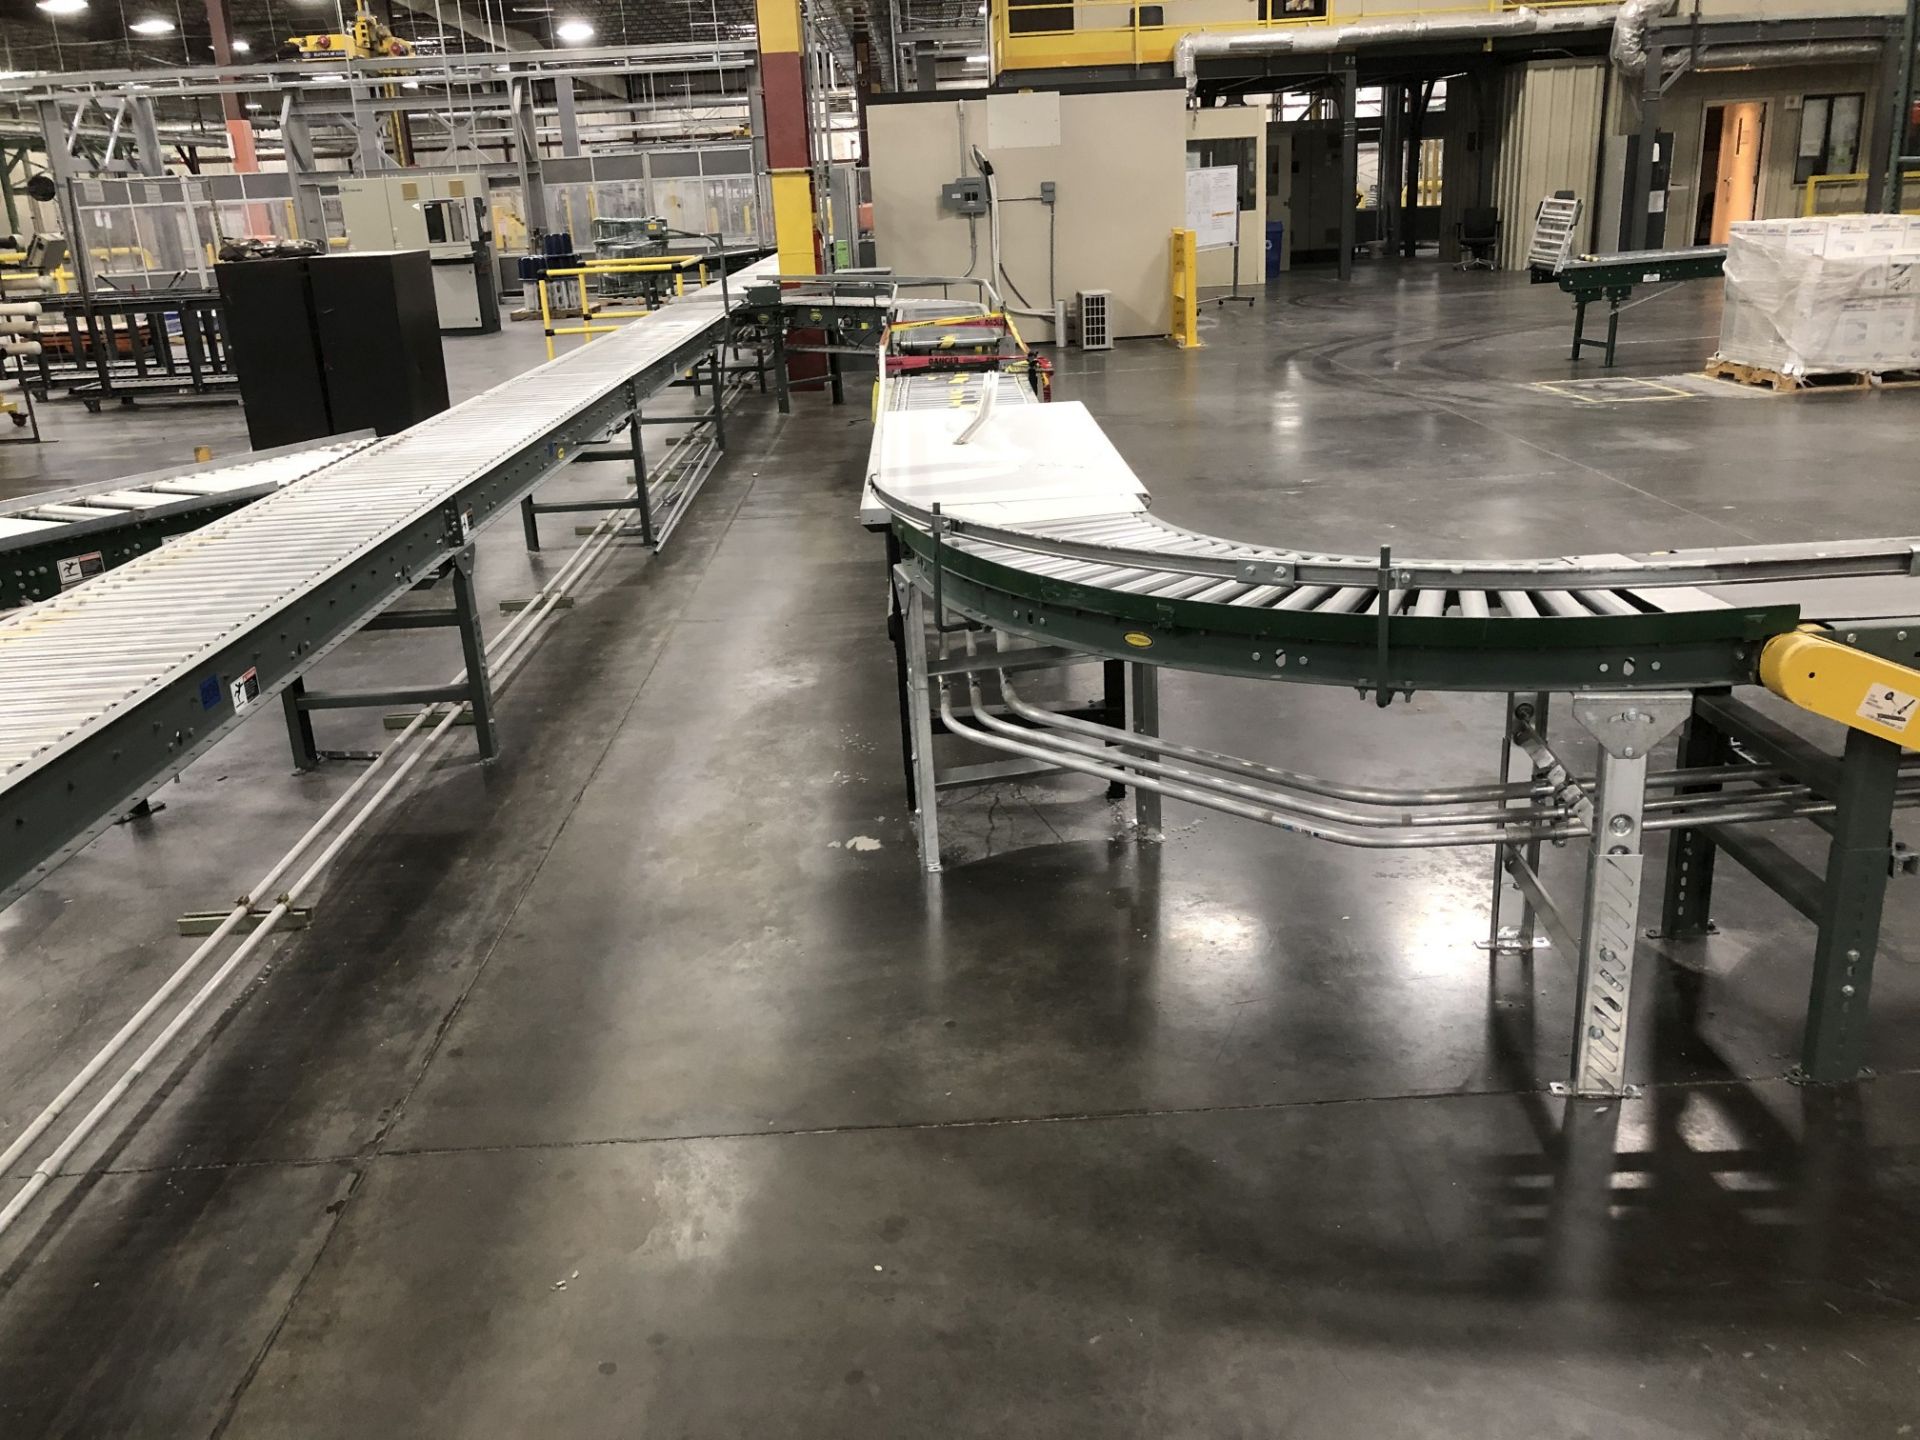 All Hytrol Conveyor Throughout Entire Site, Mostly 20" Wide Powered Roller Conveyor [Please - Image 52 of 80